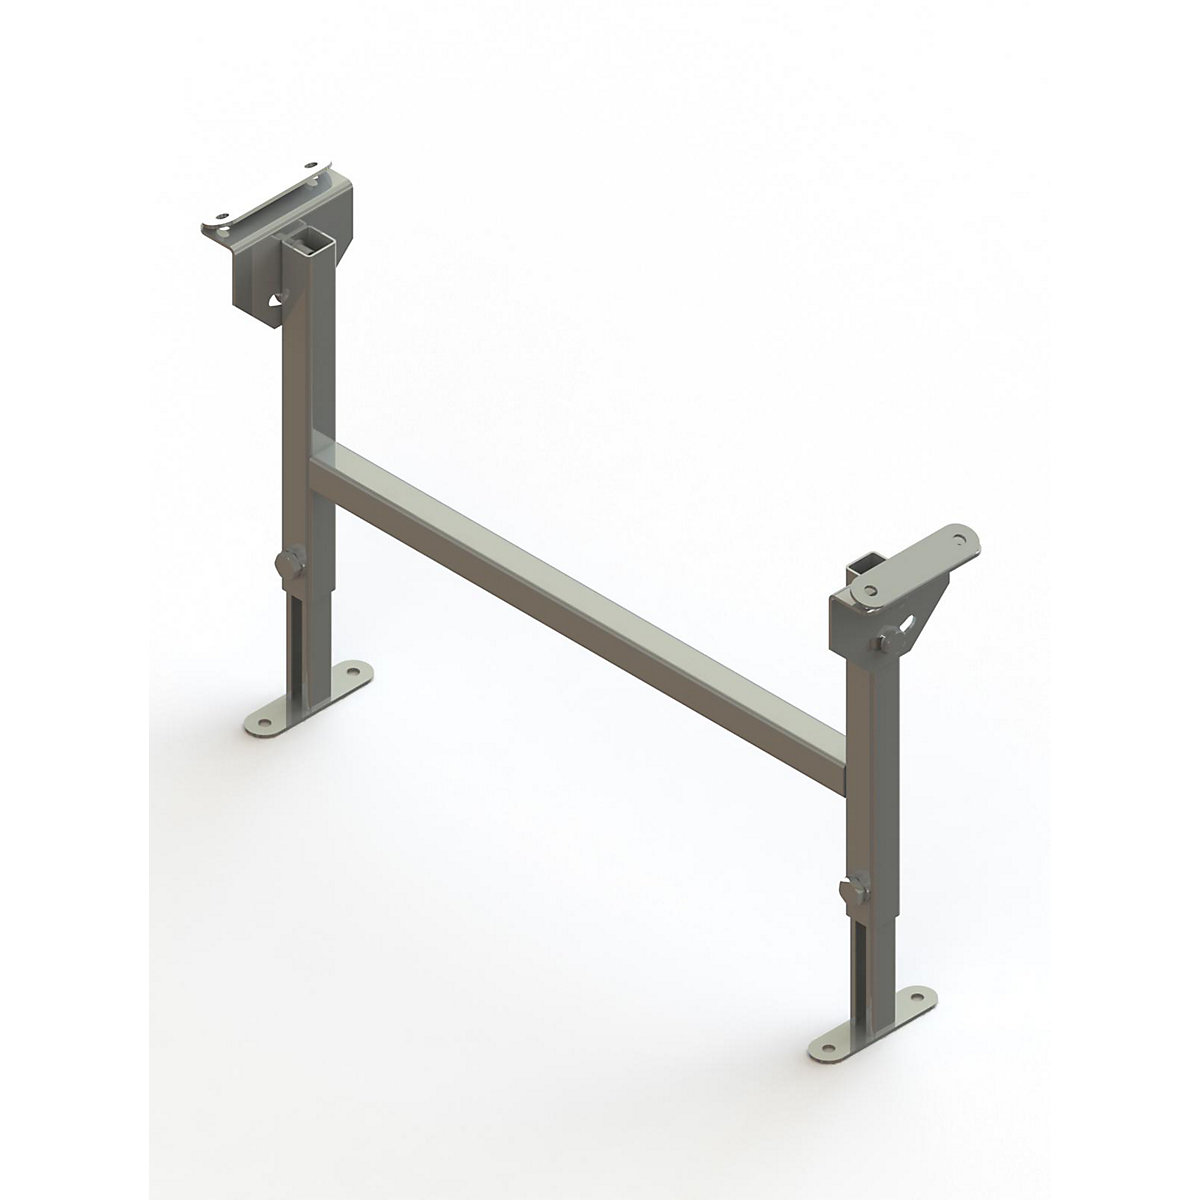 Dual frame support, zinc plated - Gura